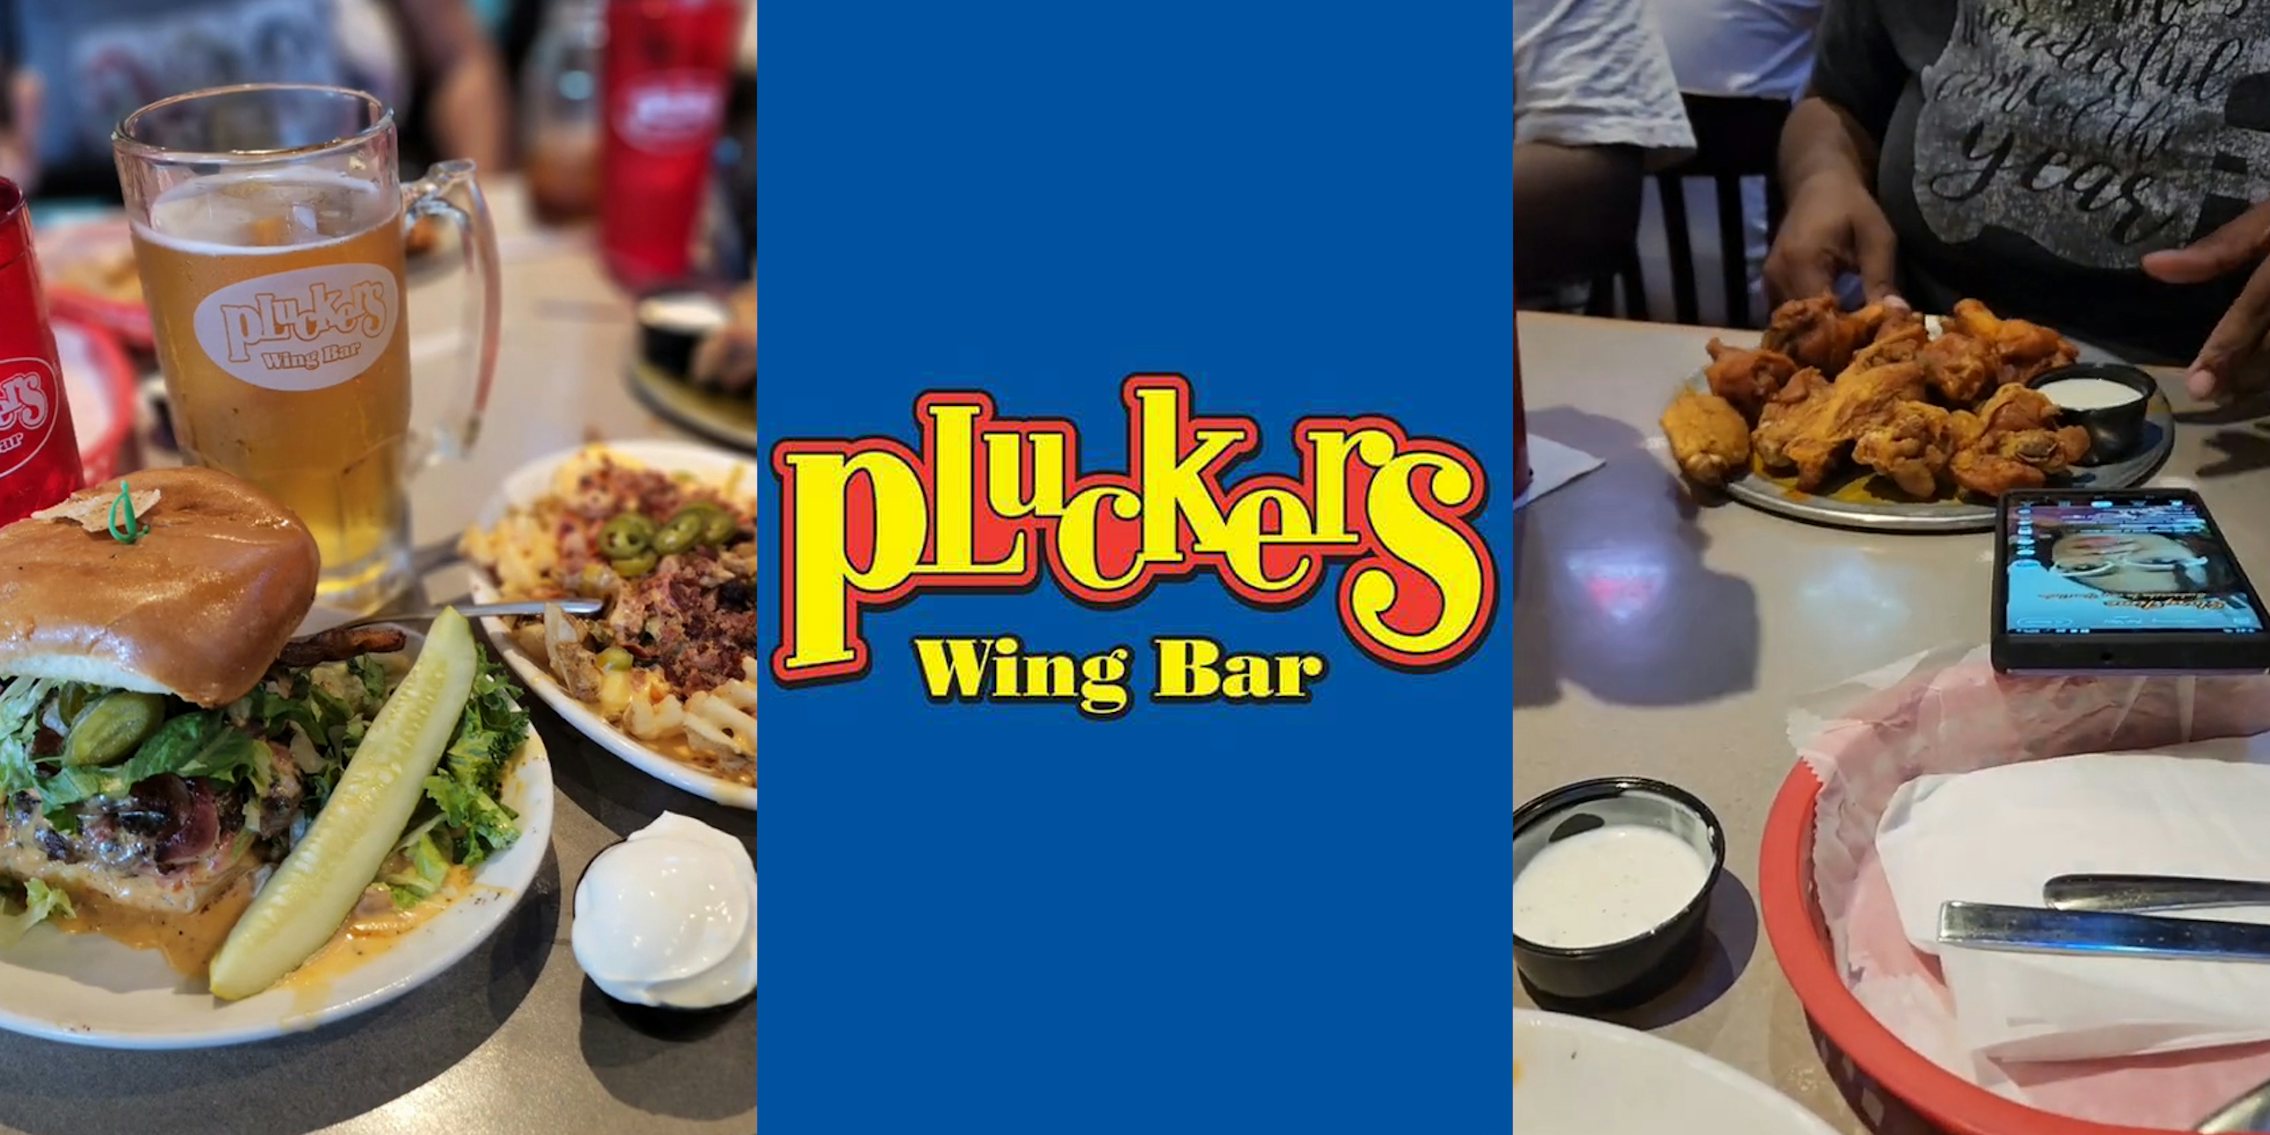 Pluckers Wing Bar burger with fries and drink in glass (l) Pluckers Wing Bar logo on blue background (c) Pluckers Wing Bar wings on table (r)